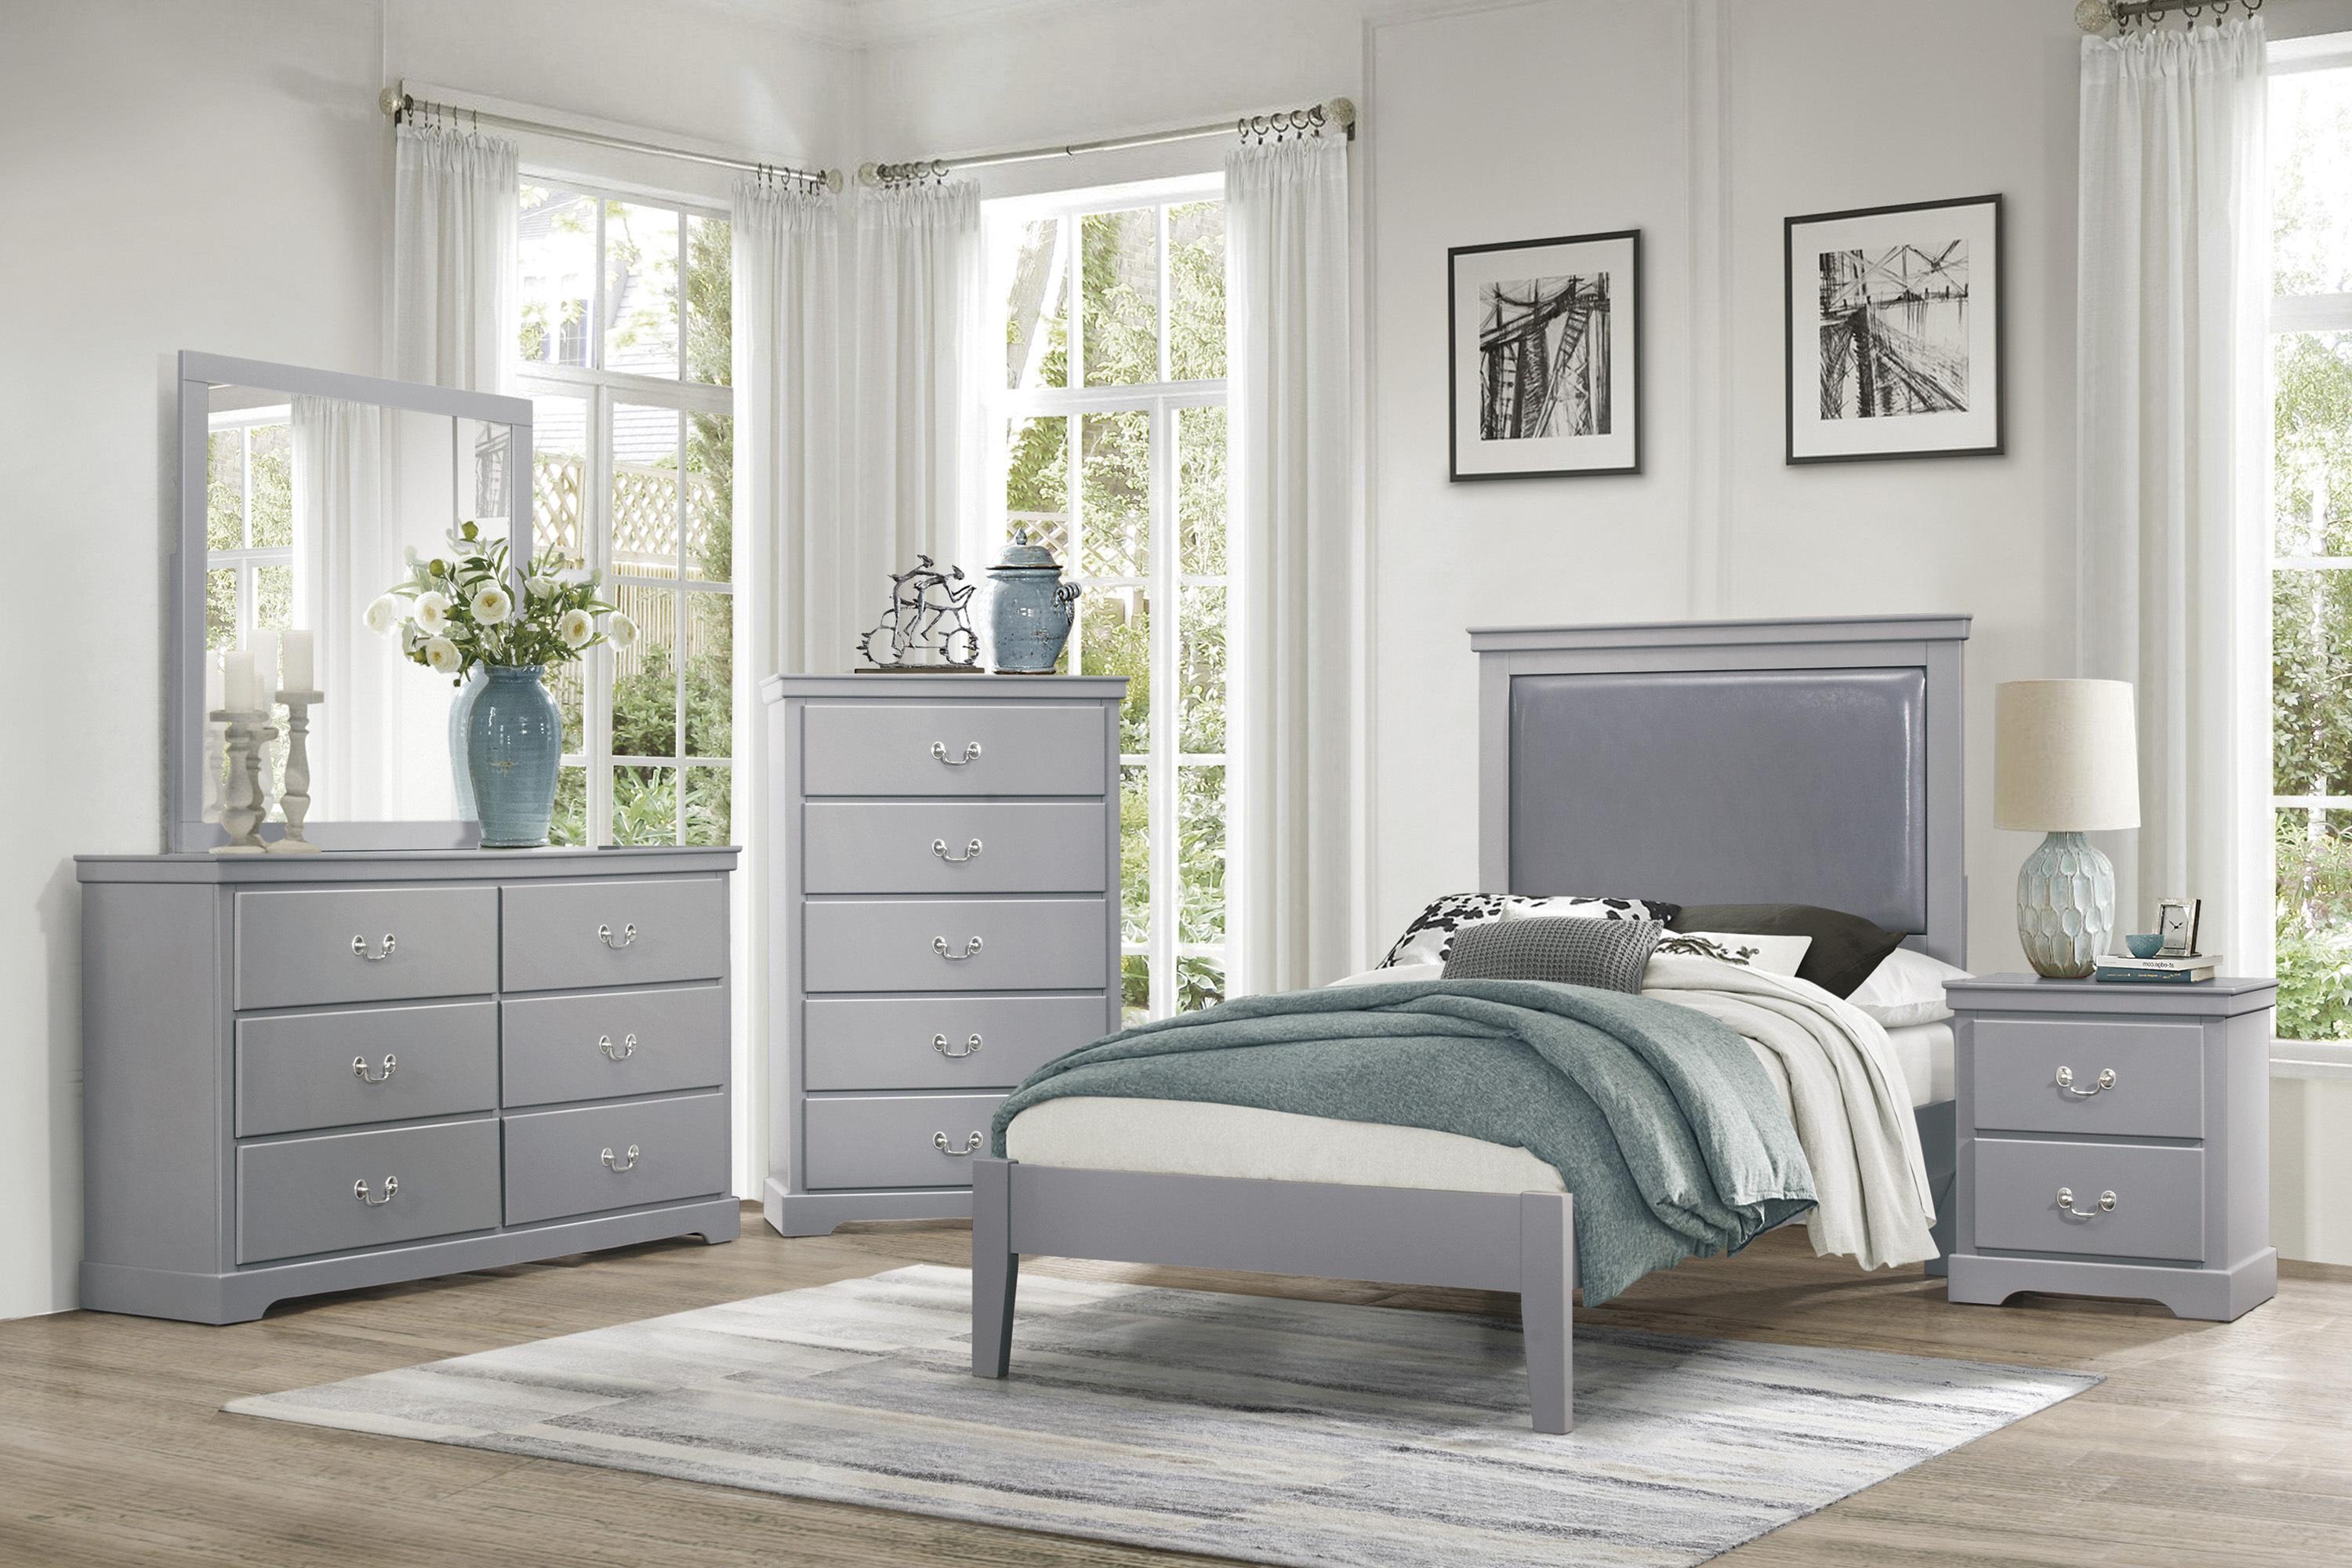 Modern Bedroom Set 1519GYT-1-5PC Seabright 1519GYT-1-5PC in Gray Faux Leather